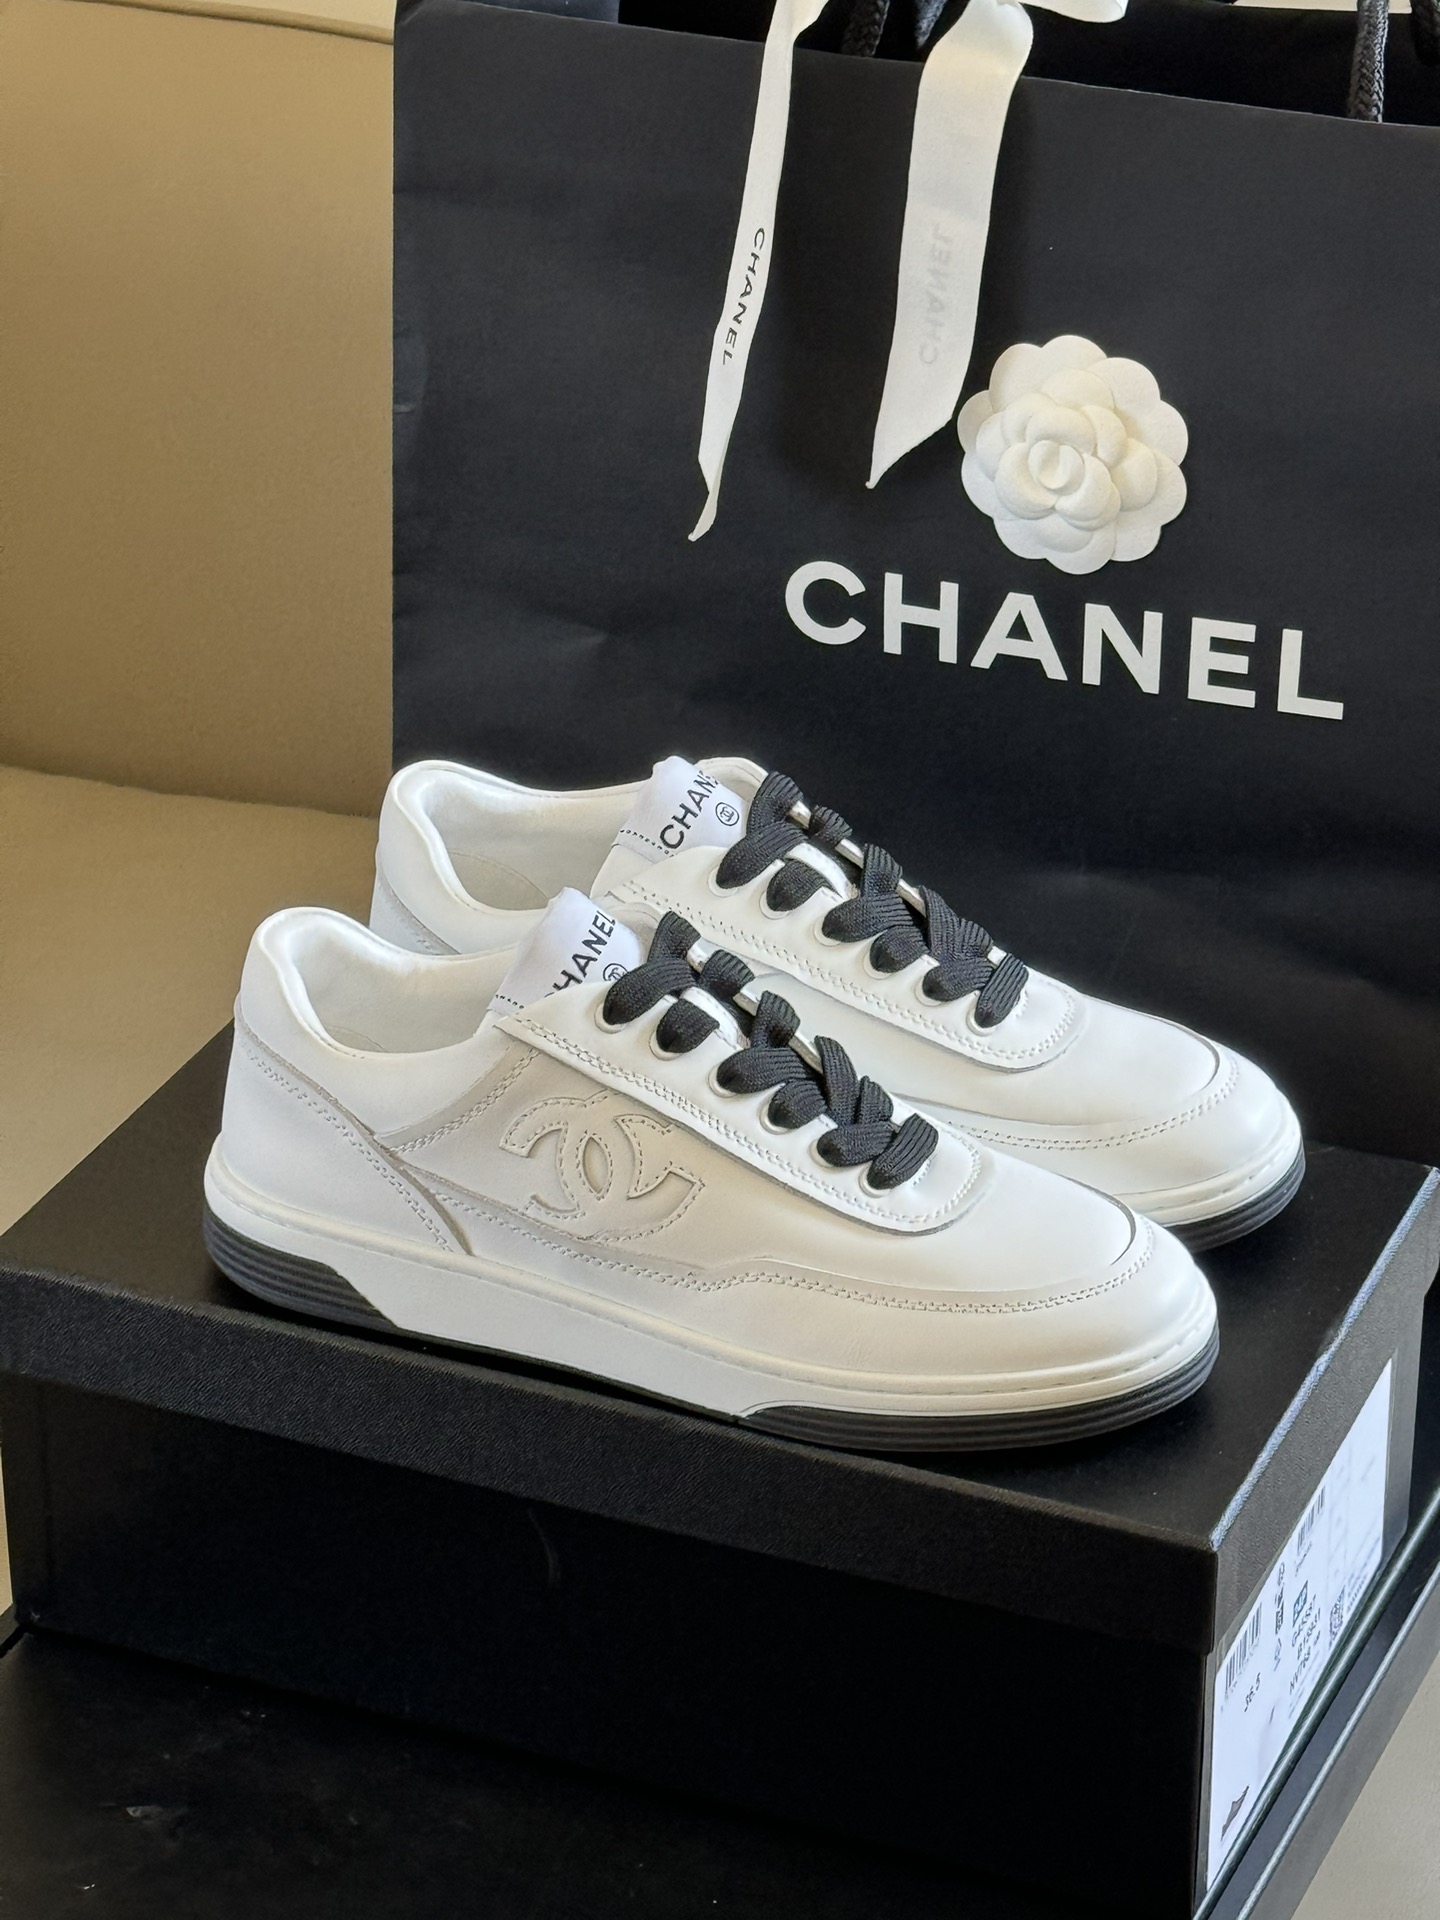 Chanel Skateboard Shoes Pink Calfskin Cowhide Spring/Summer Collection rmb10100